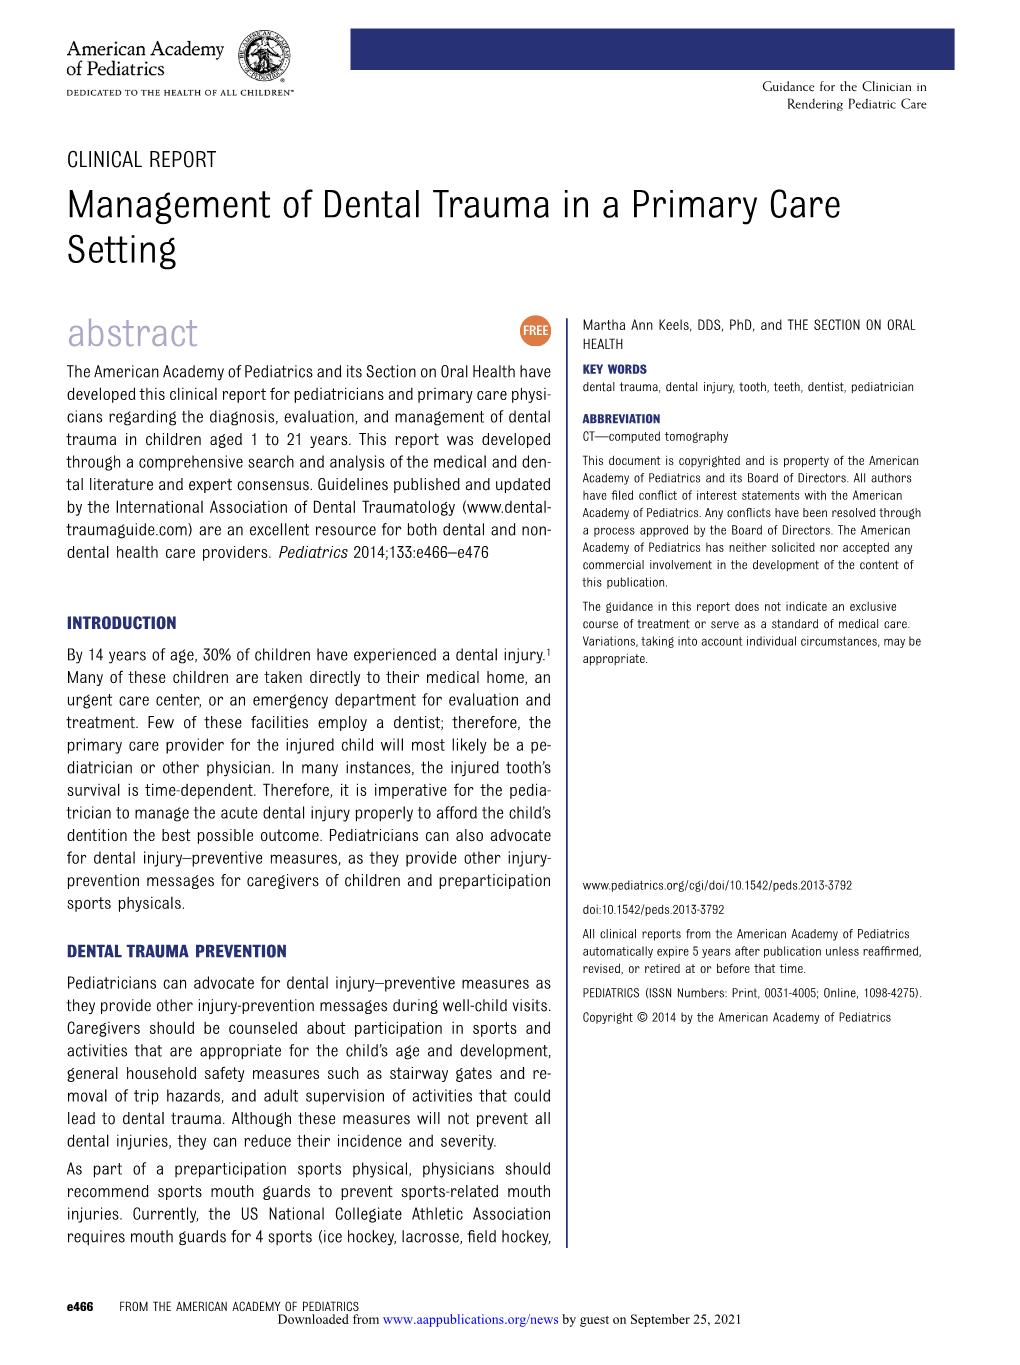 Management of Dental Trauma in a Primary Care Setting Abstract